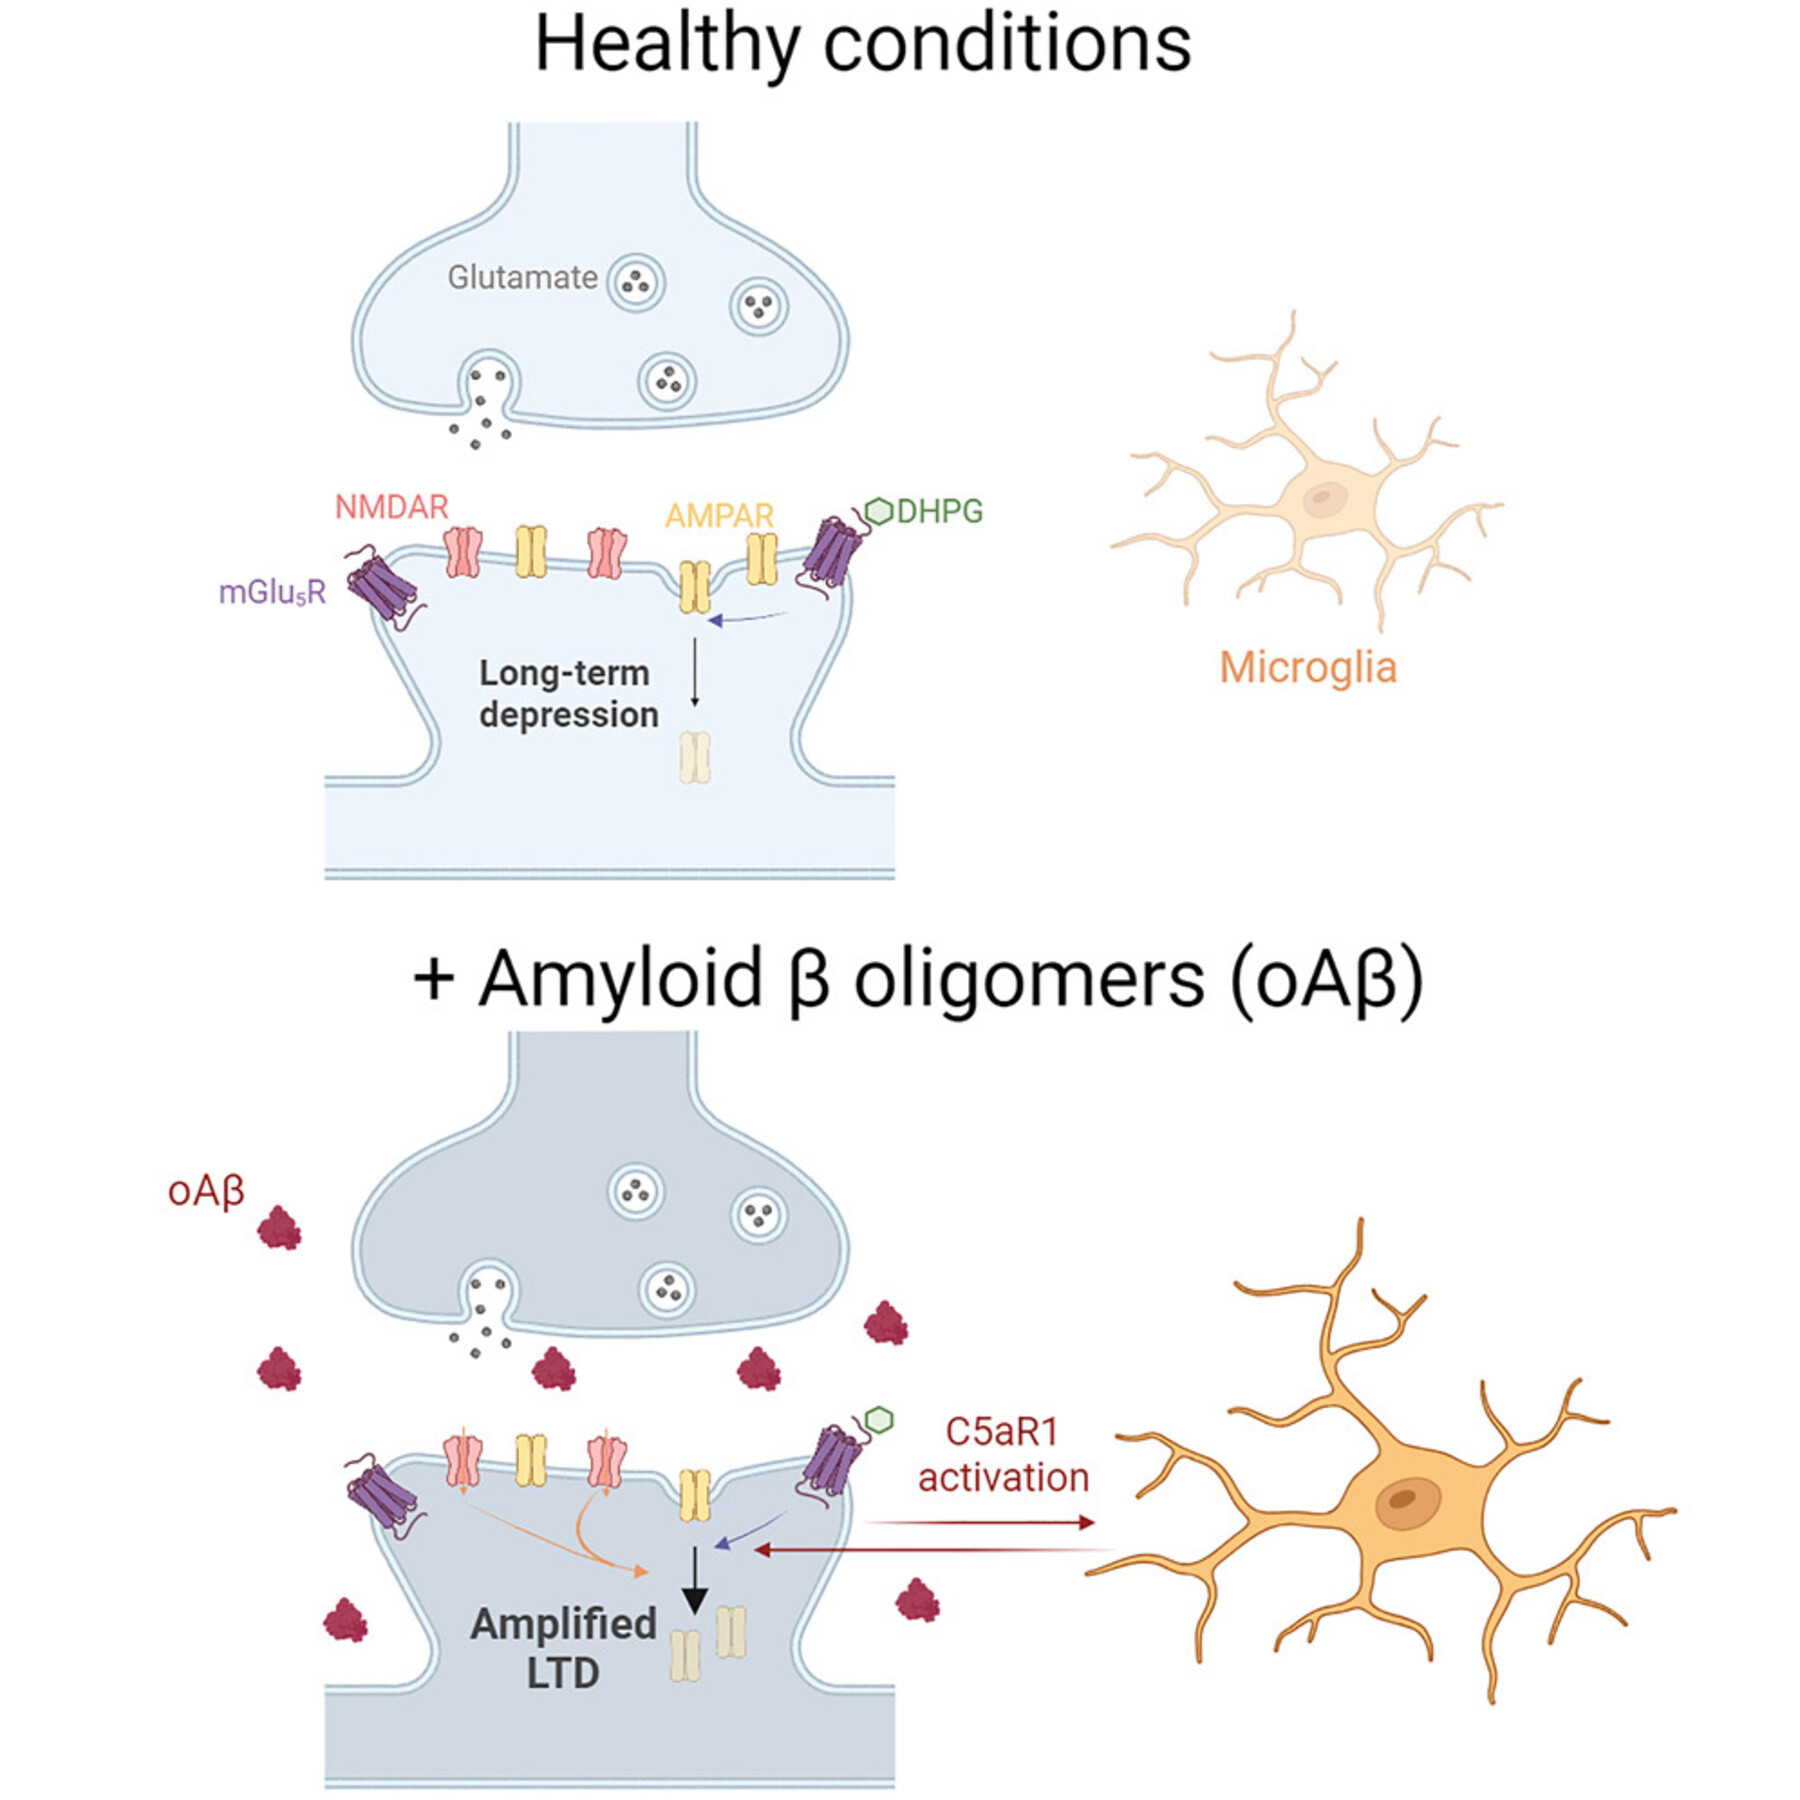 Graphical abstract of healthy conditions vs. amyloid